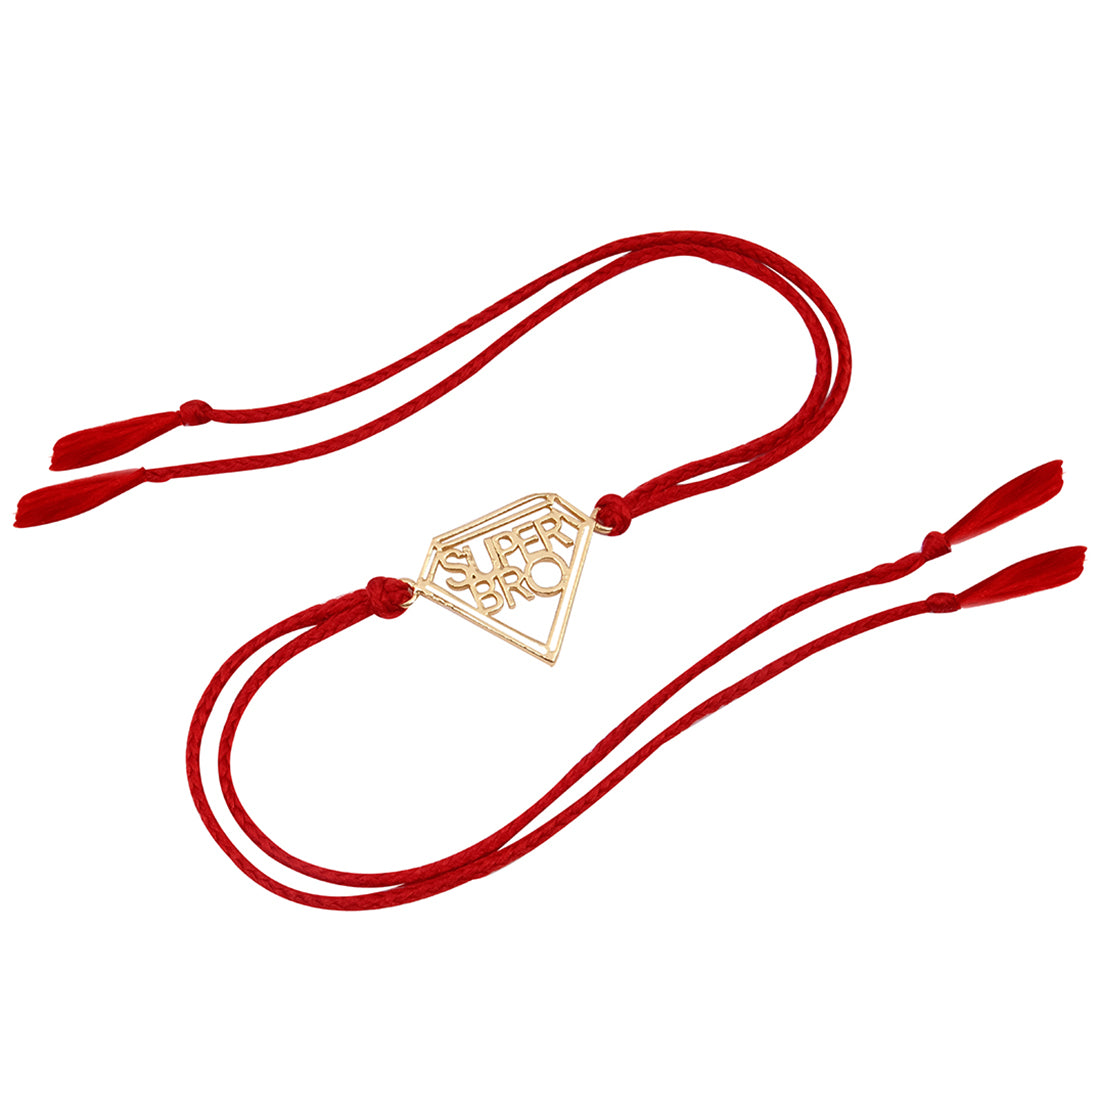 HANDCRAFTED GOLD-PLATED BRASS SUPER BRO STATEMENT RAKHI WITH ADJUSTABLE TIE THREAD